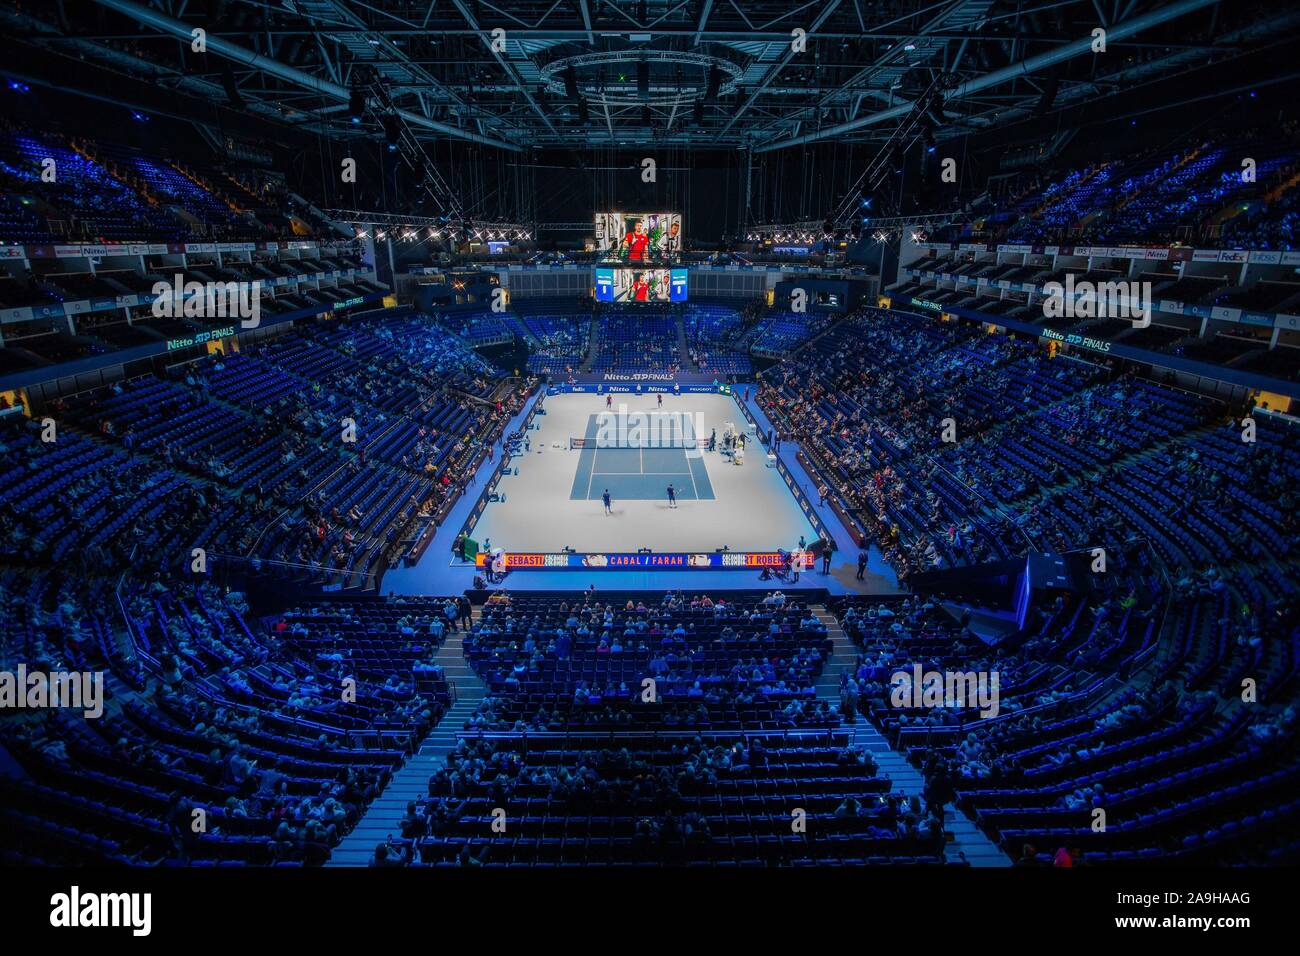 London, UK. 15th Nov 2019. O2 Arena, London, England; Nitto ATP Tennis  Finals; A general view at O2 Arena - Editorial Use Credit: Action Plus  Sports Images/Alamy Live News Stock Photo - Alamy